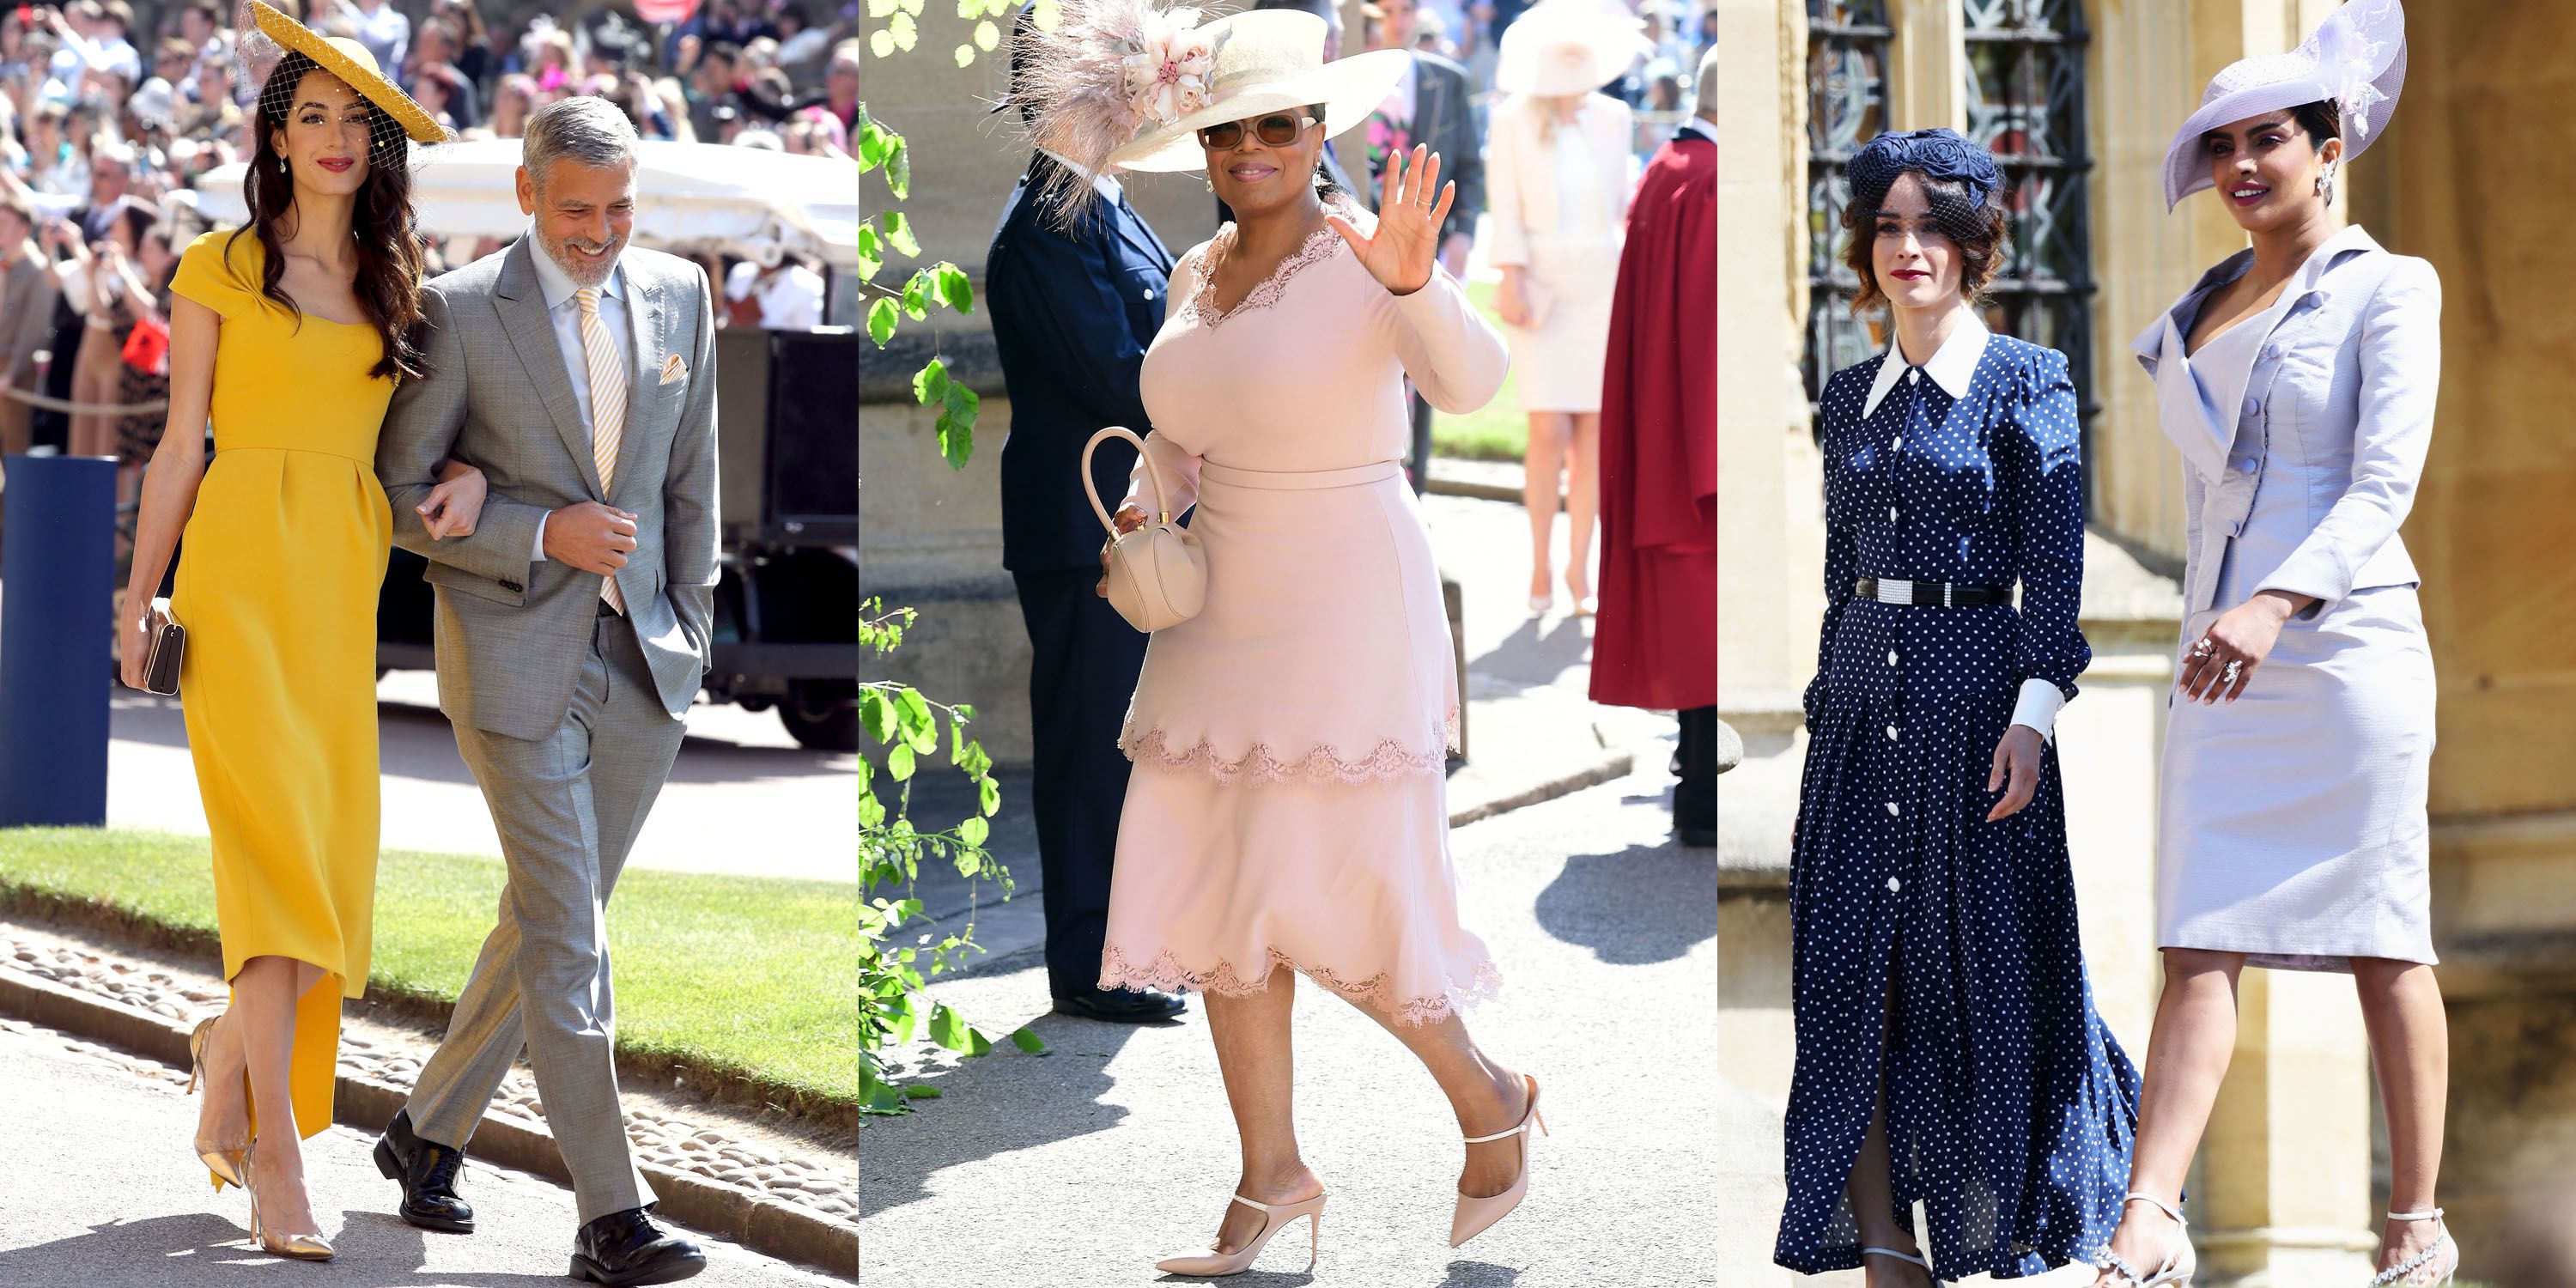 Royal Wedding Best Dressed Guests Meghan Markle Prince Harry Wedding Guest Photos